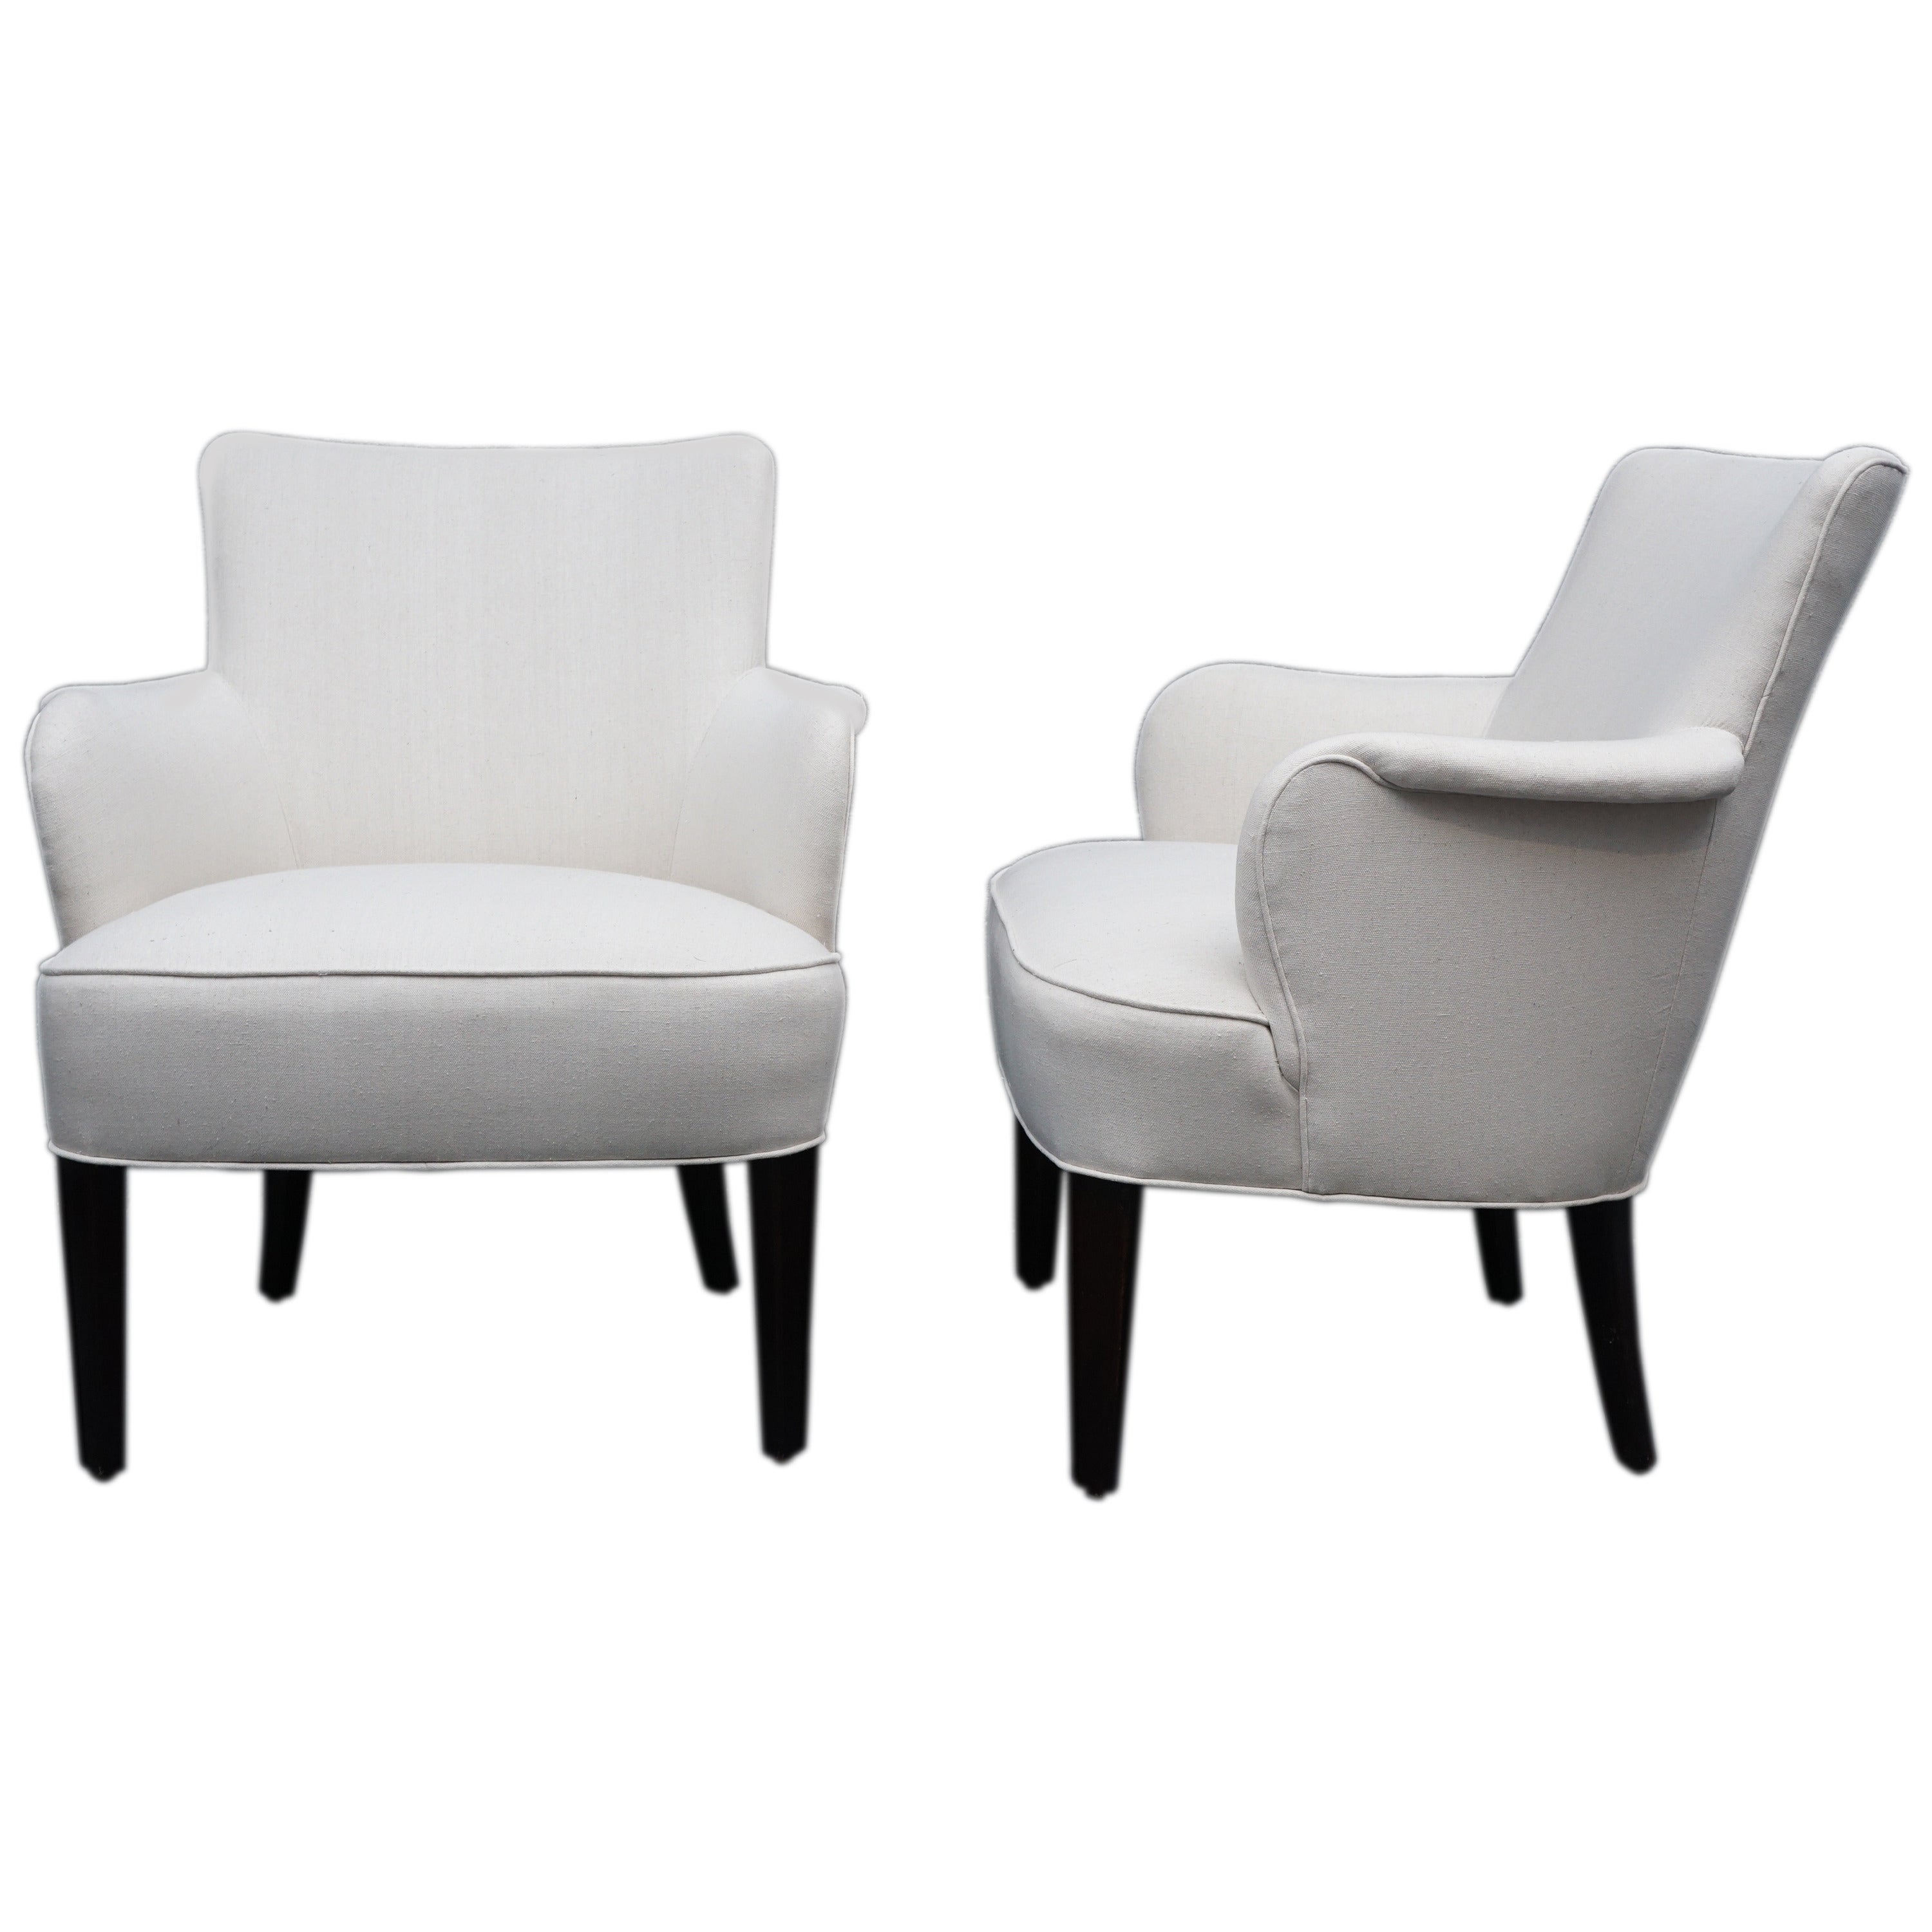 Pair of Graphic Club Chairs